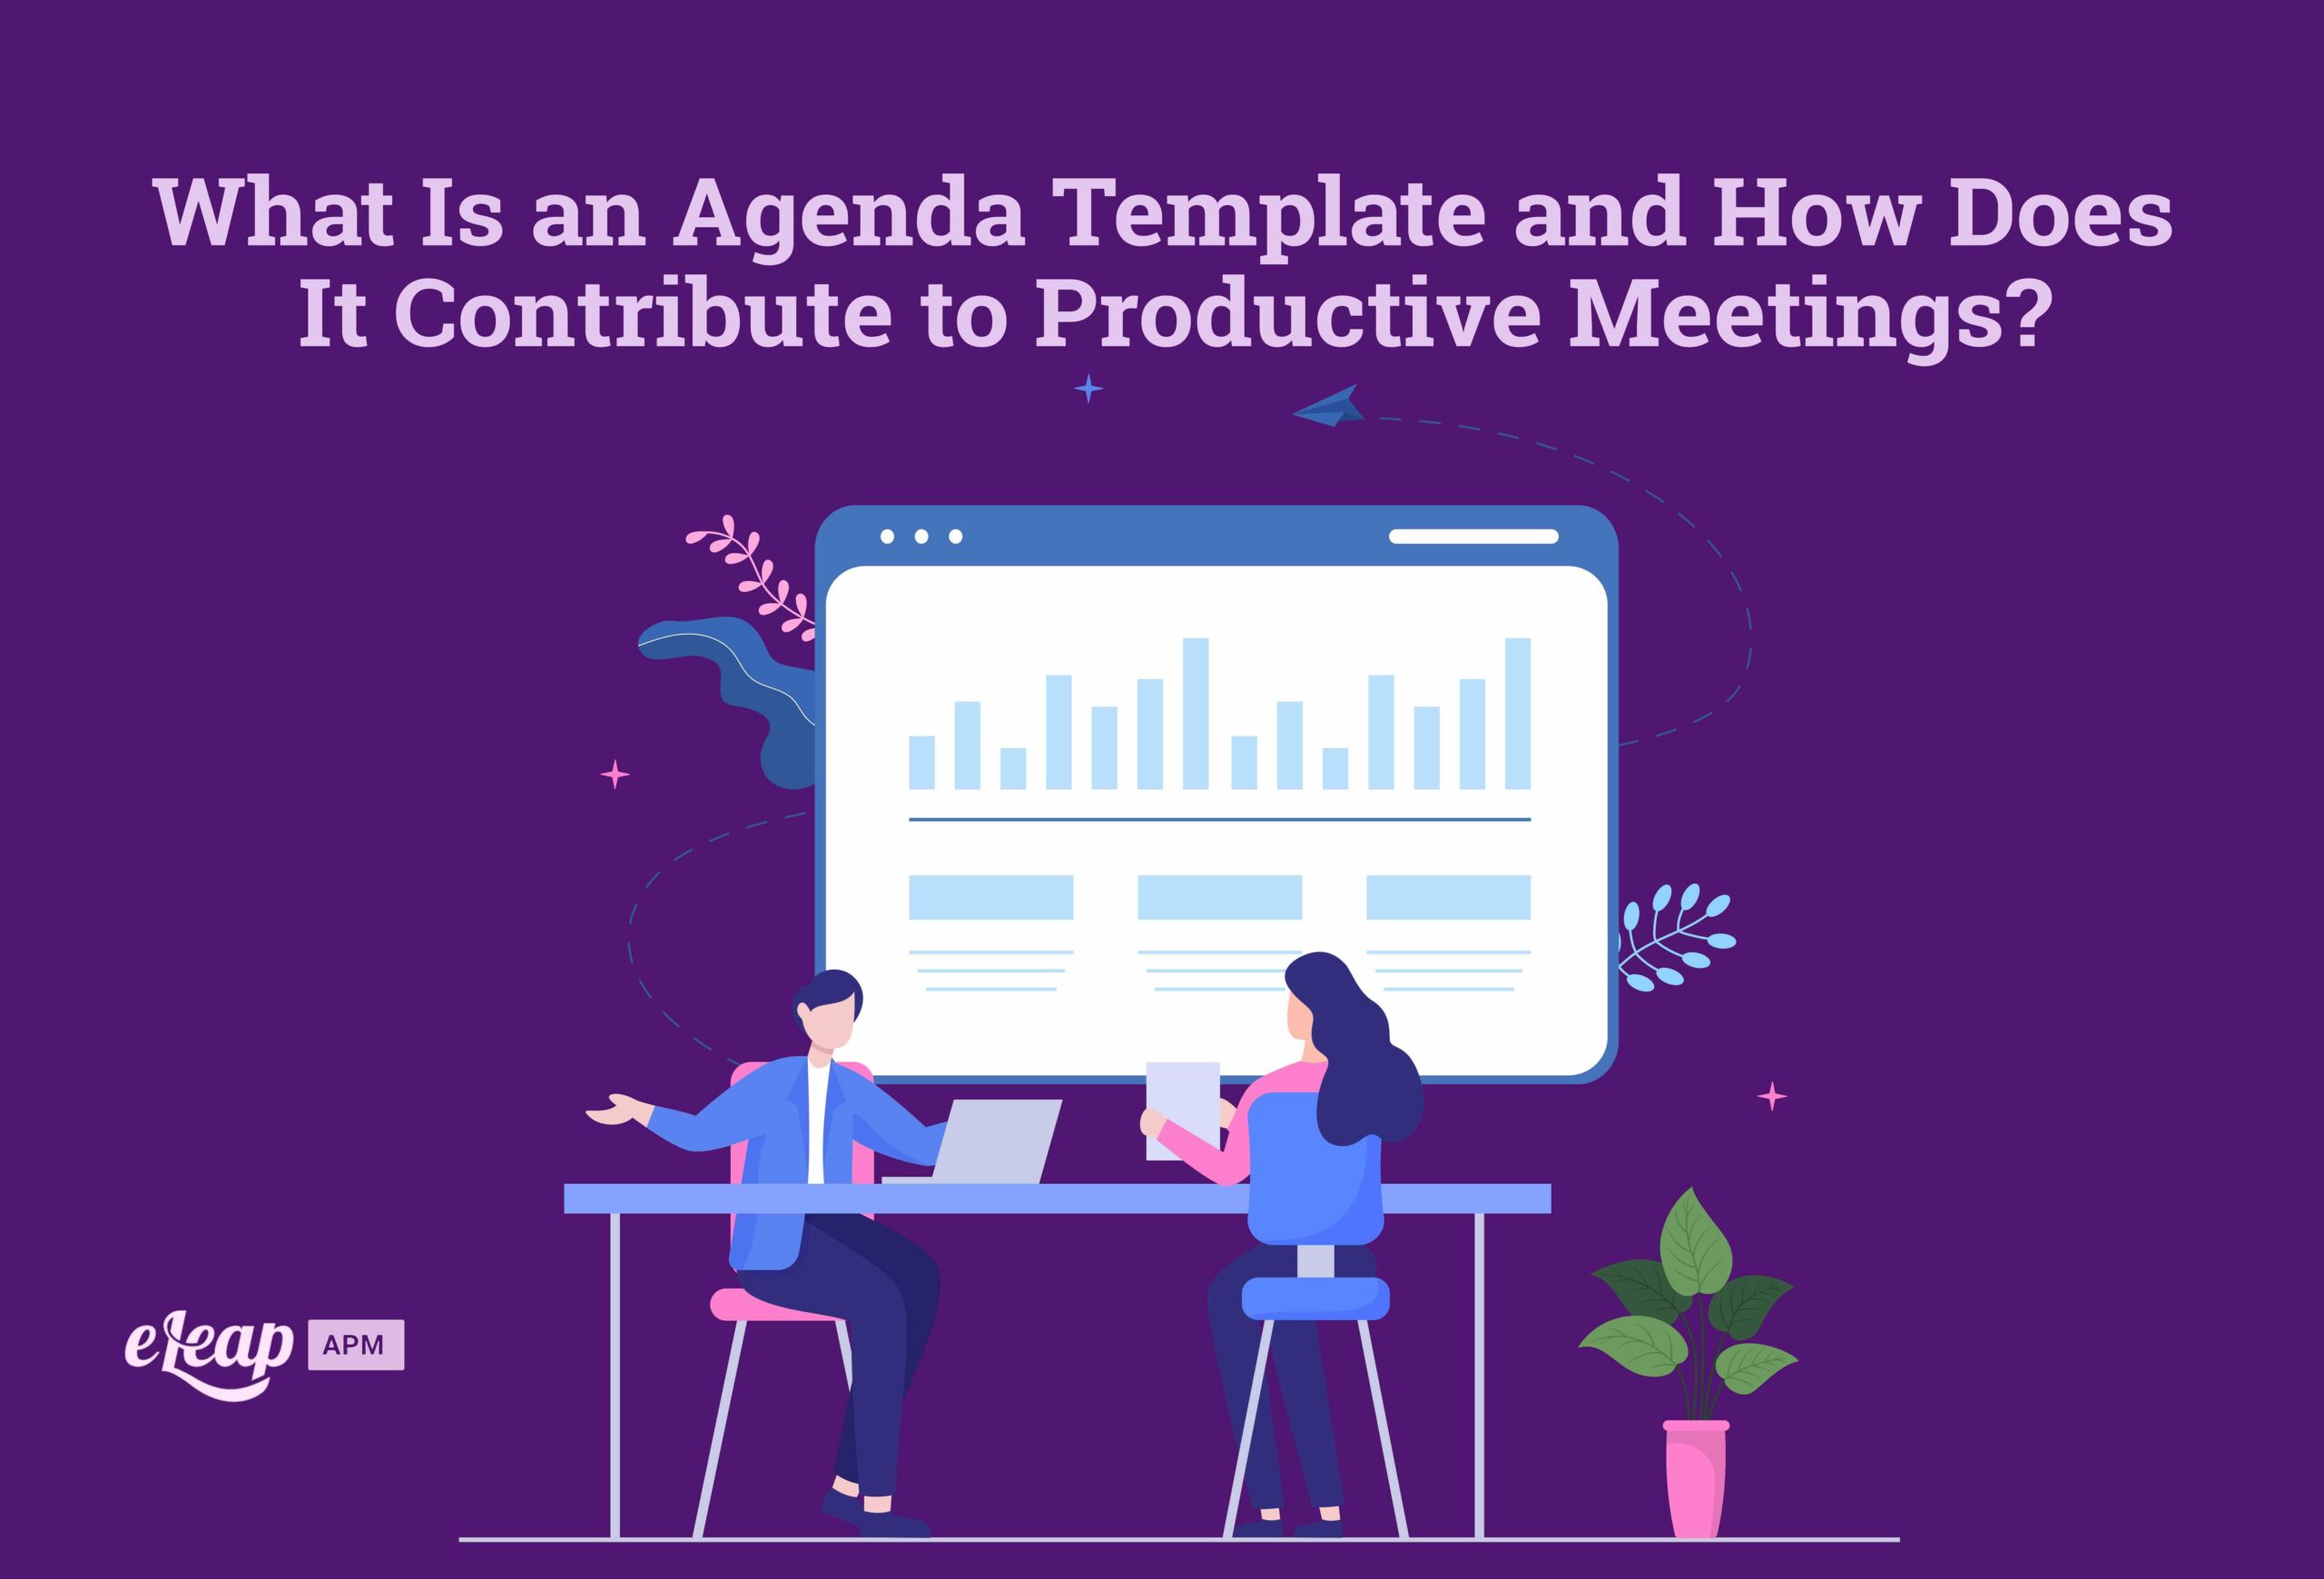 What Is an Agenda Template and How Does It Contribute to Productive Meetings?